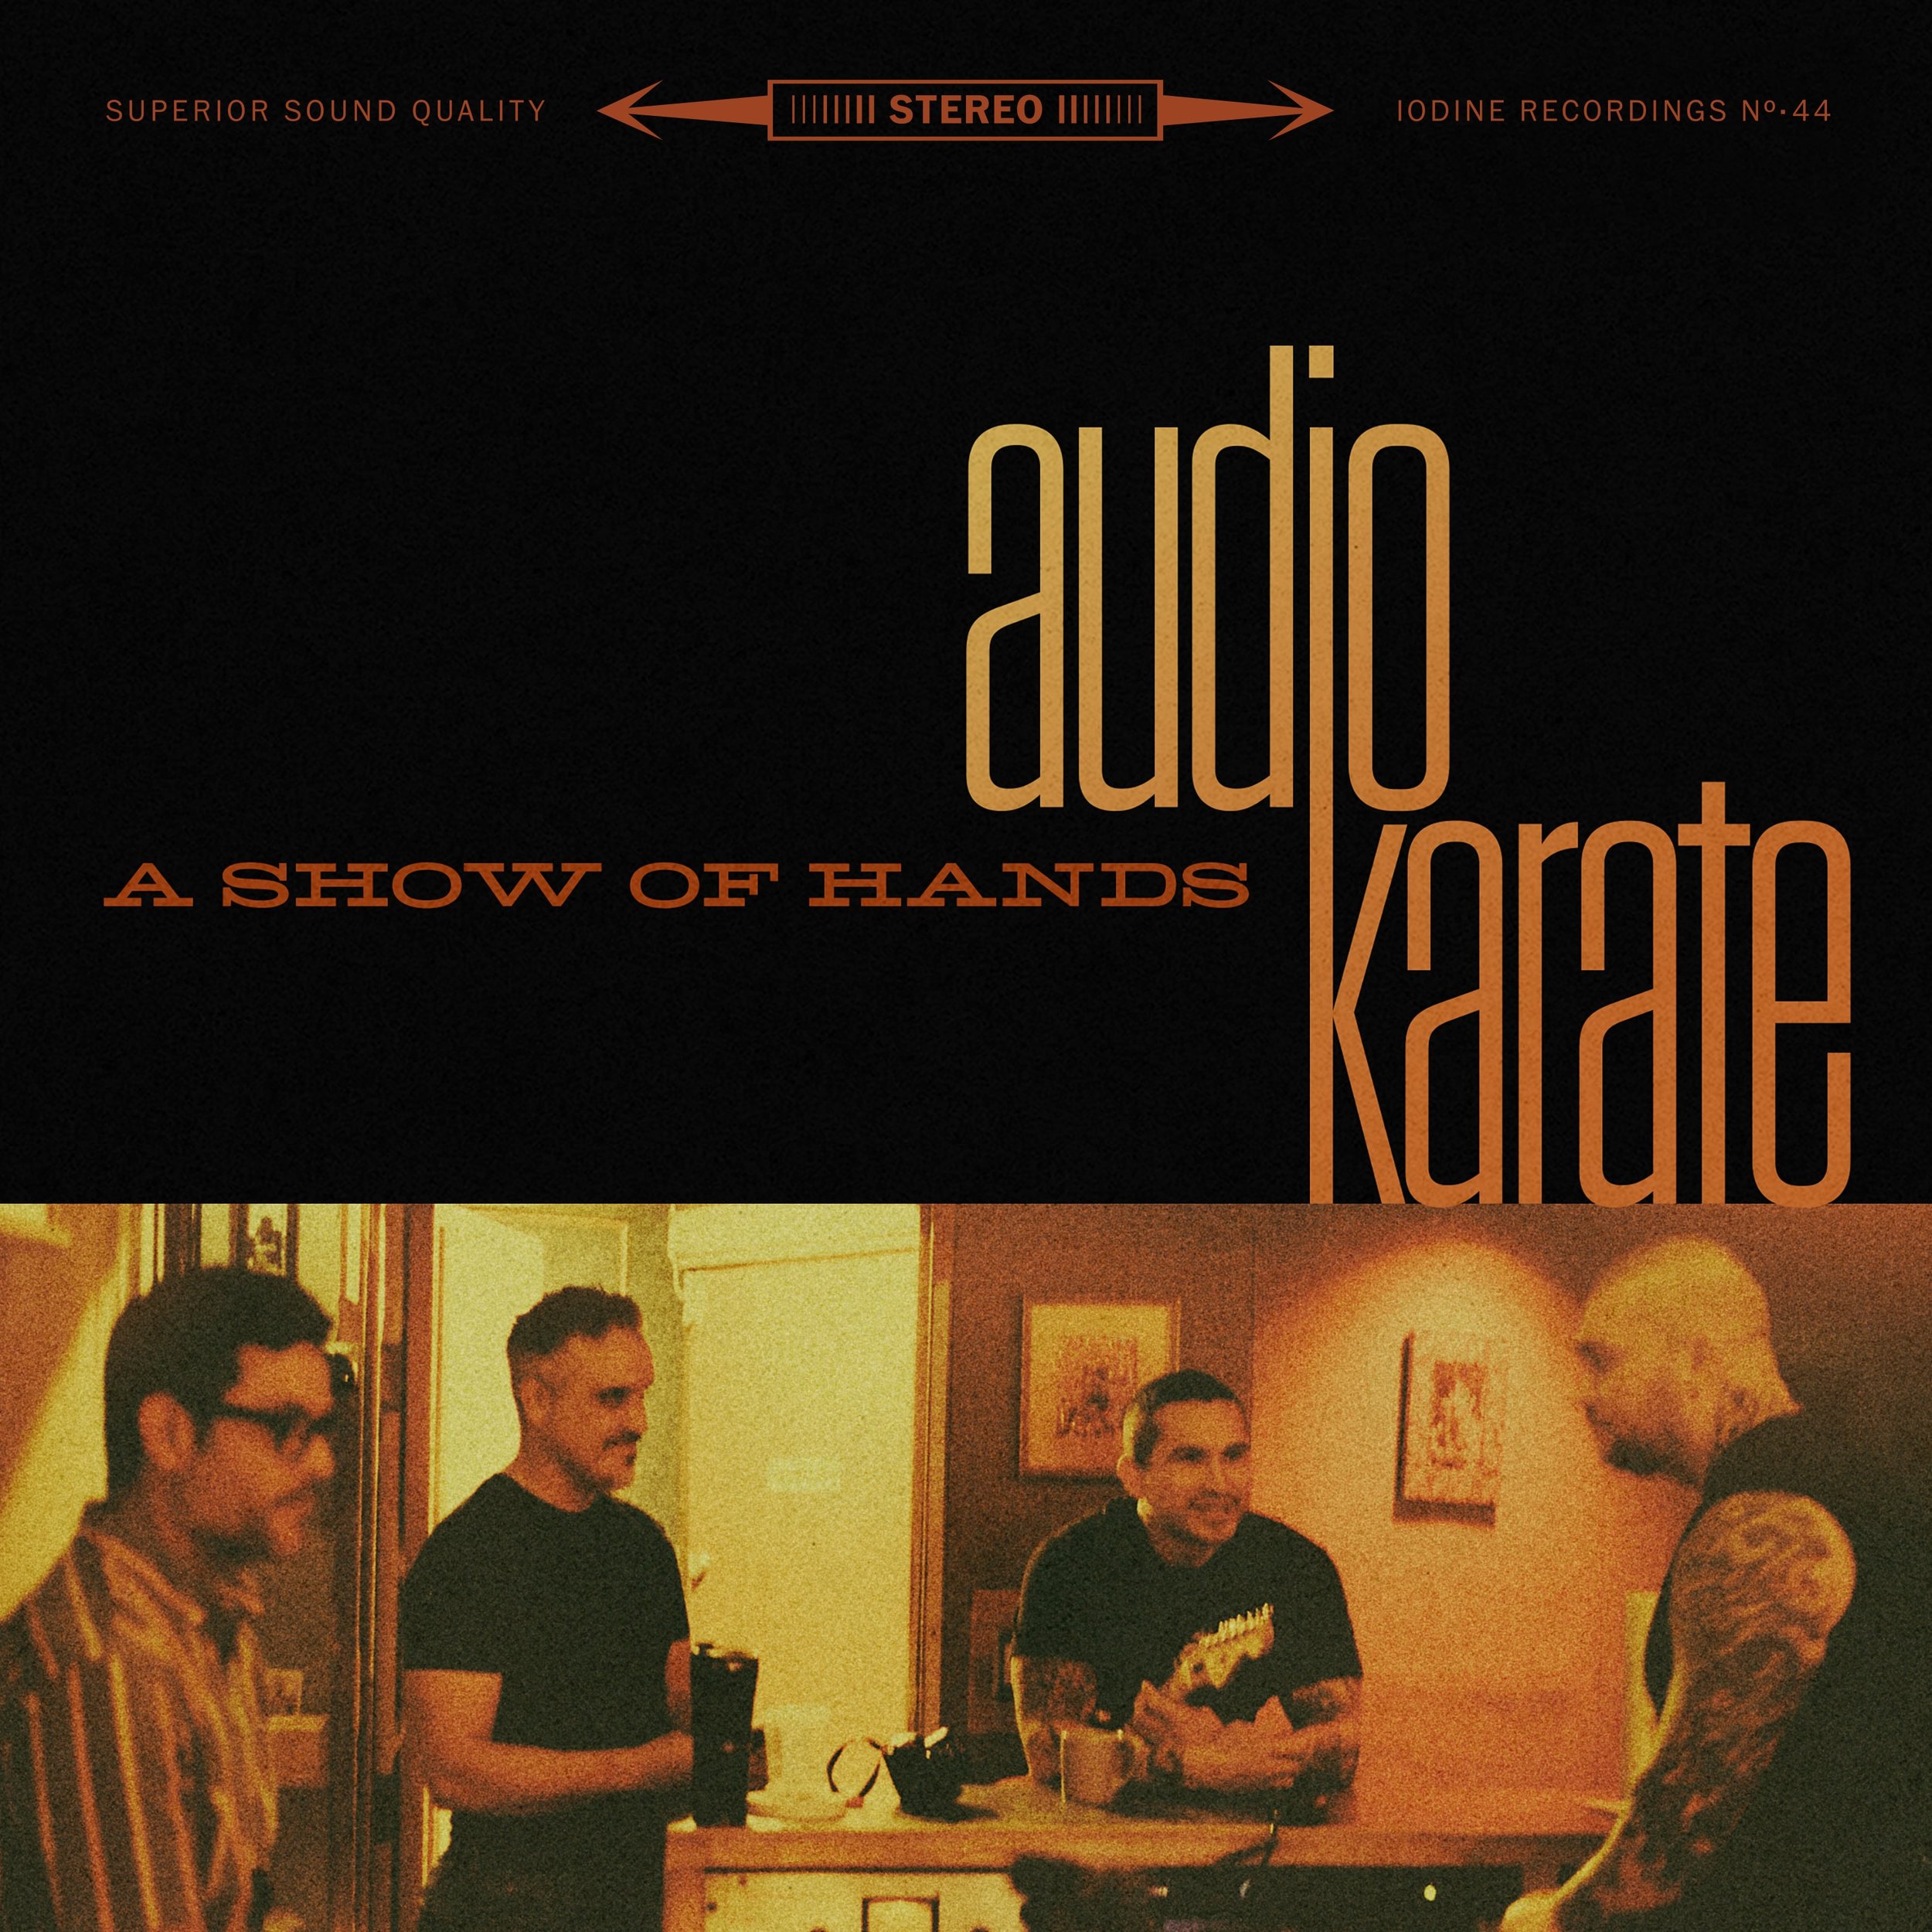 Audio Karate - A Show Of Hands - Cover.jpg